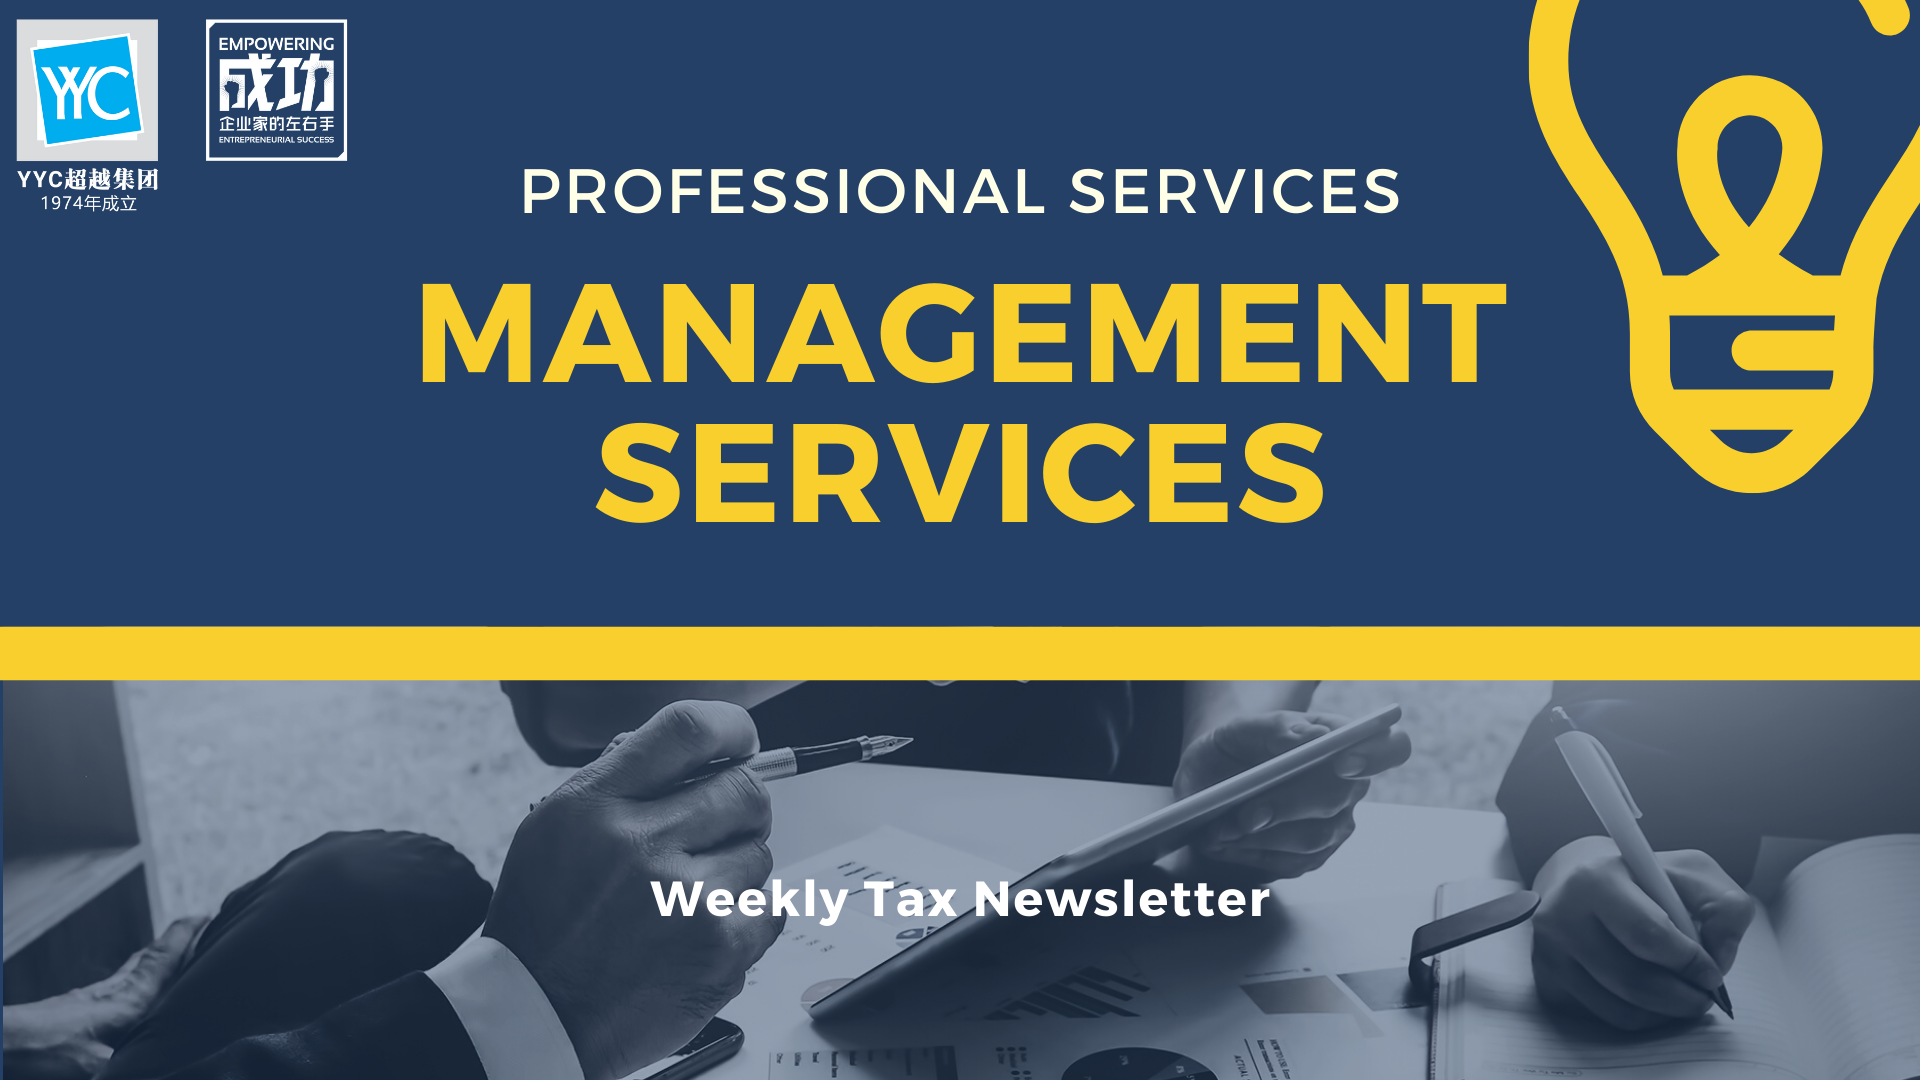 Service tax is a consumption tax levied on the prescribed services known as 'taxable services’. The provision of management services is a taxable service under...